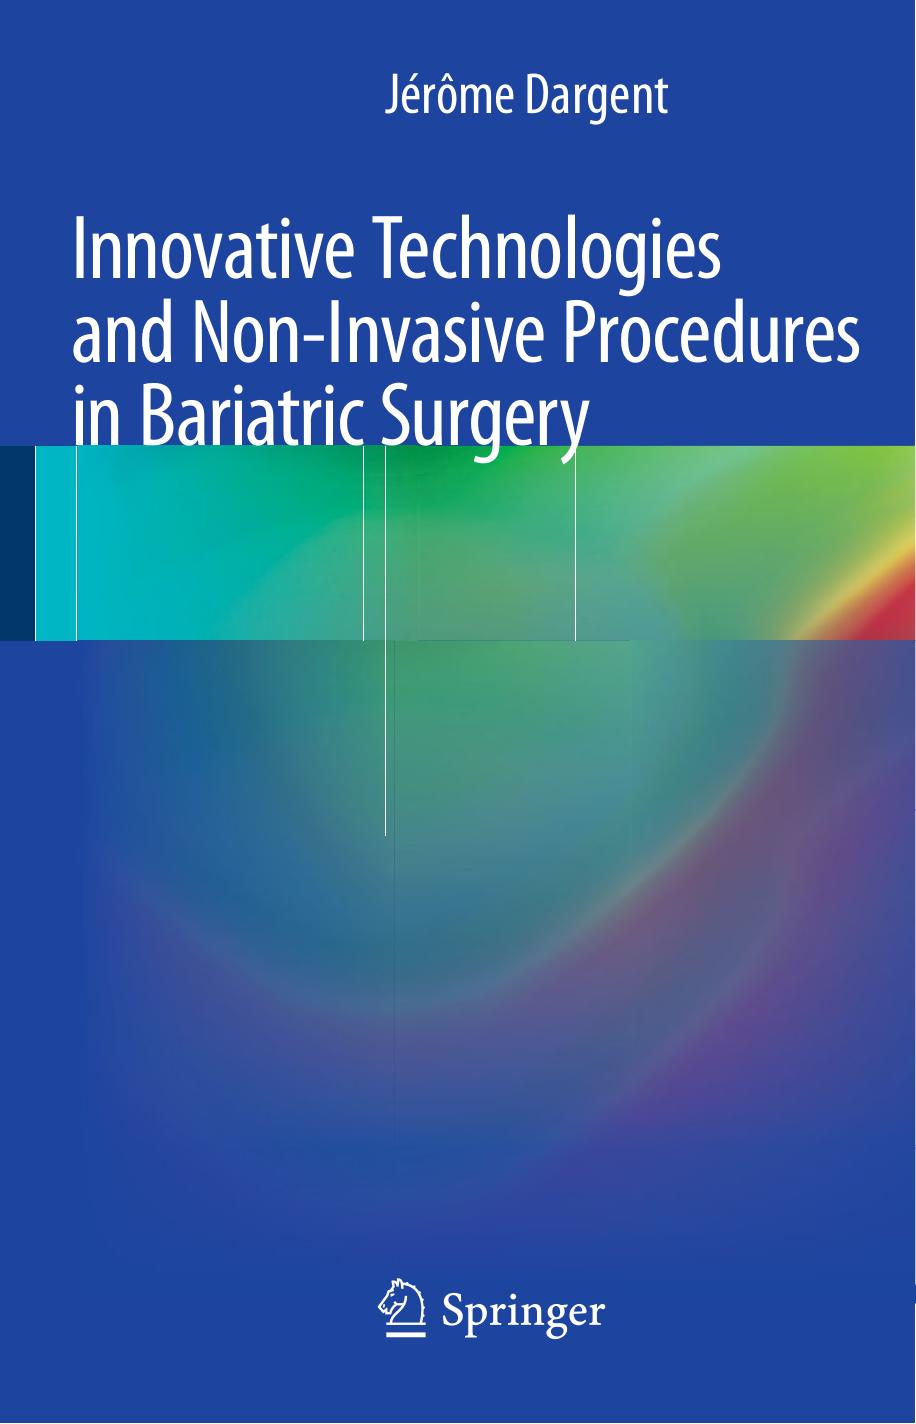 Innovative Technologies and Non-Invasive Procedures in Bariatric Surgery by Jérôme Dargent